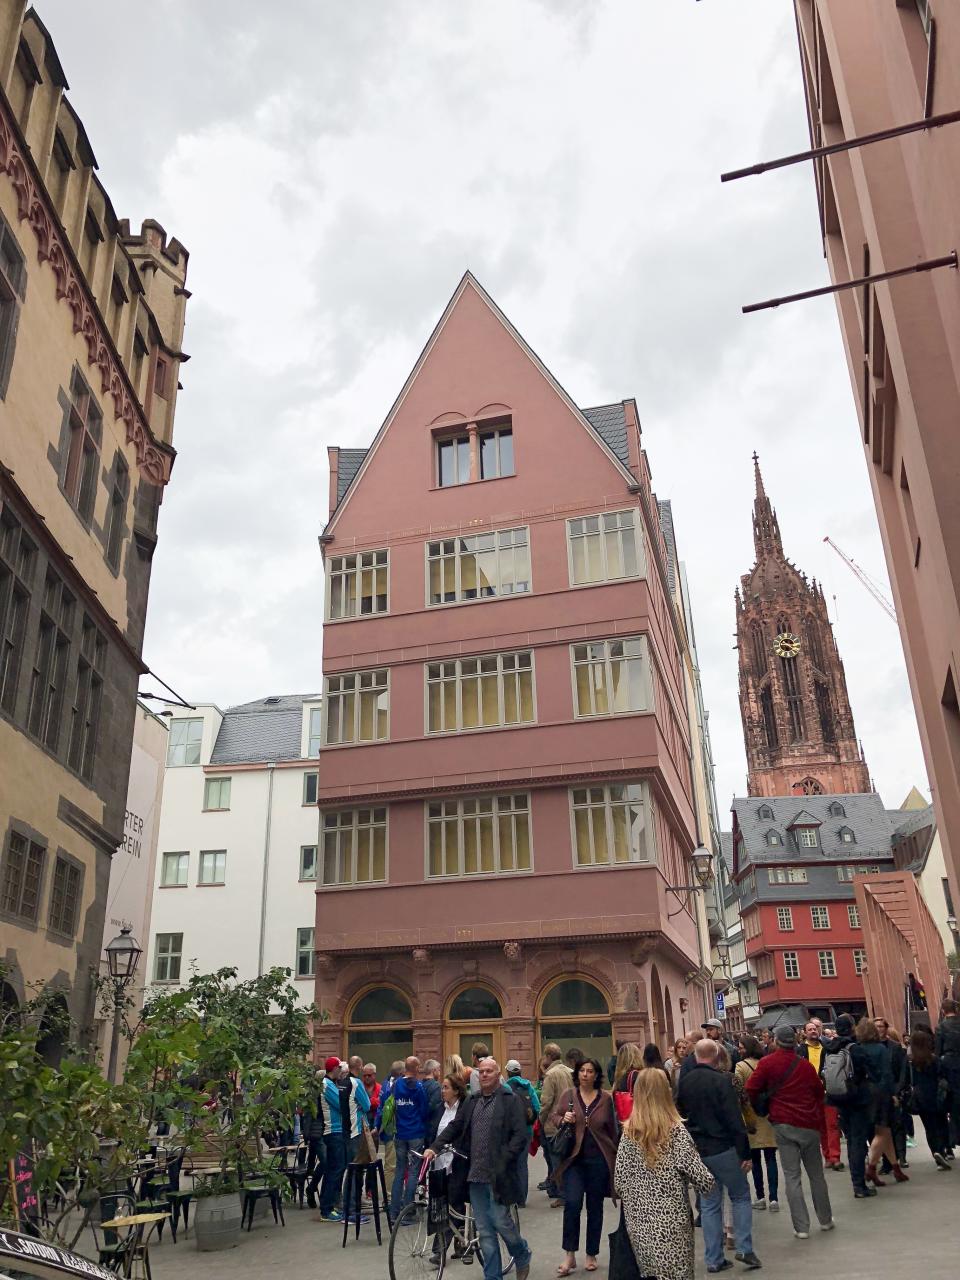 At street level, the narrow red building in Frankfurt's new old town is constructed of large stones, a material common in medieval times.